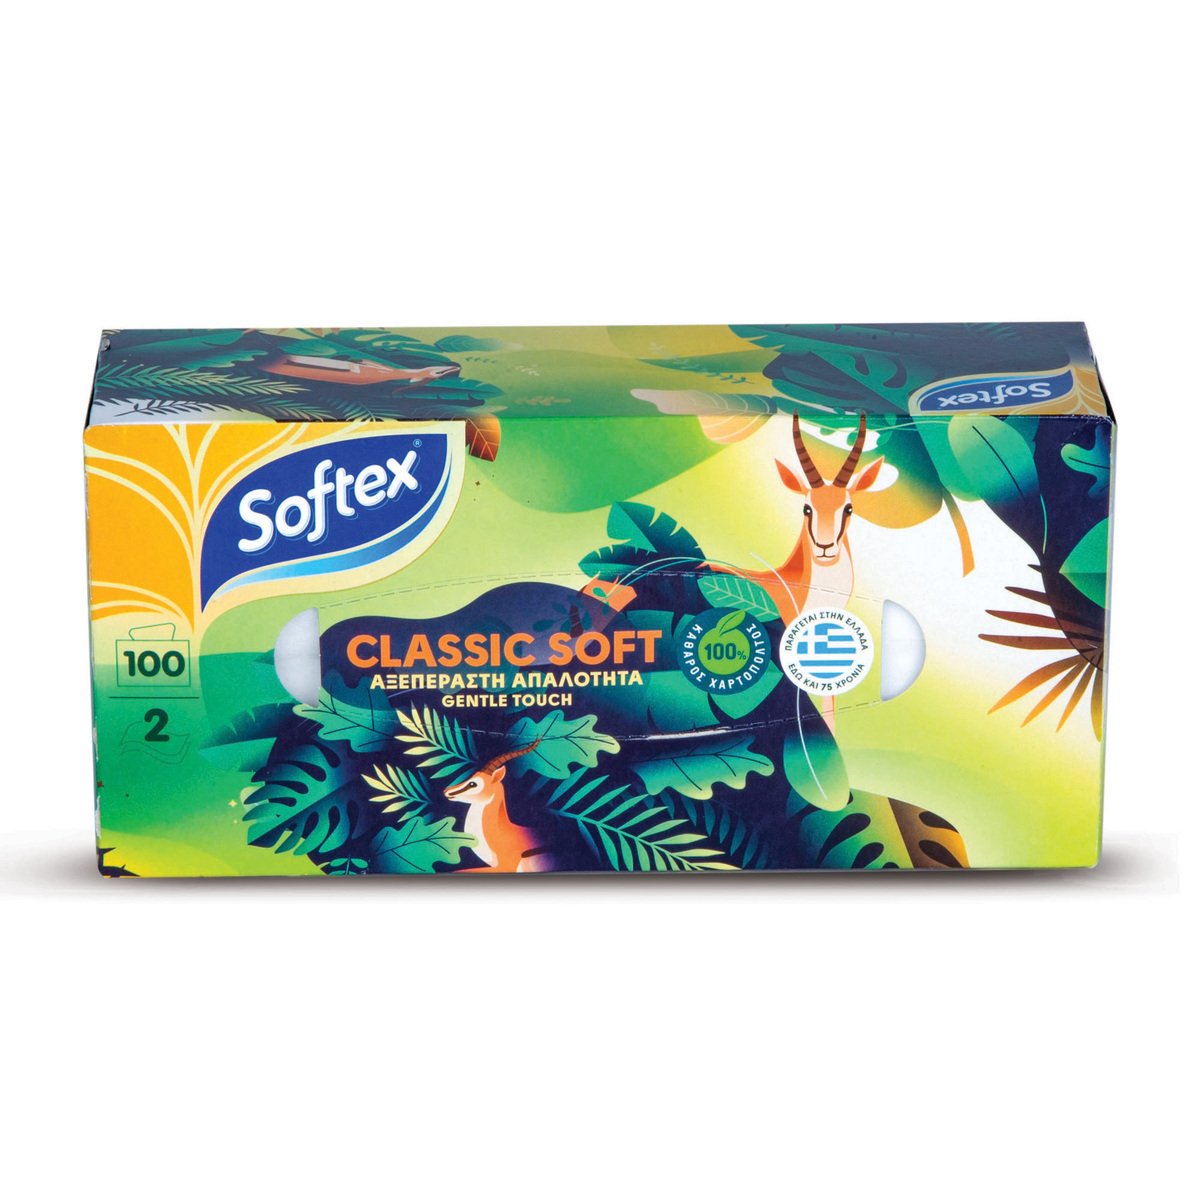 Softex Facial Tissue Classic Soft 2ply 6 x 100 Sheets